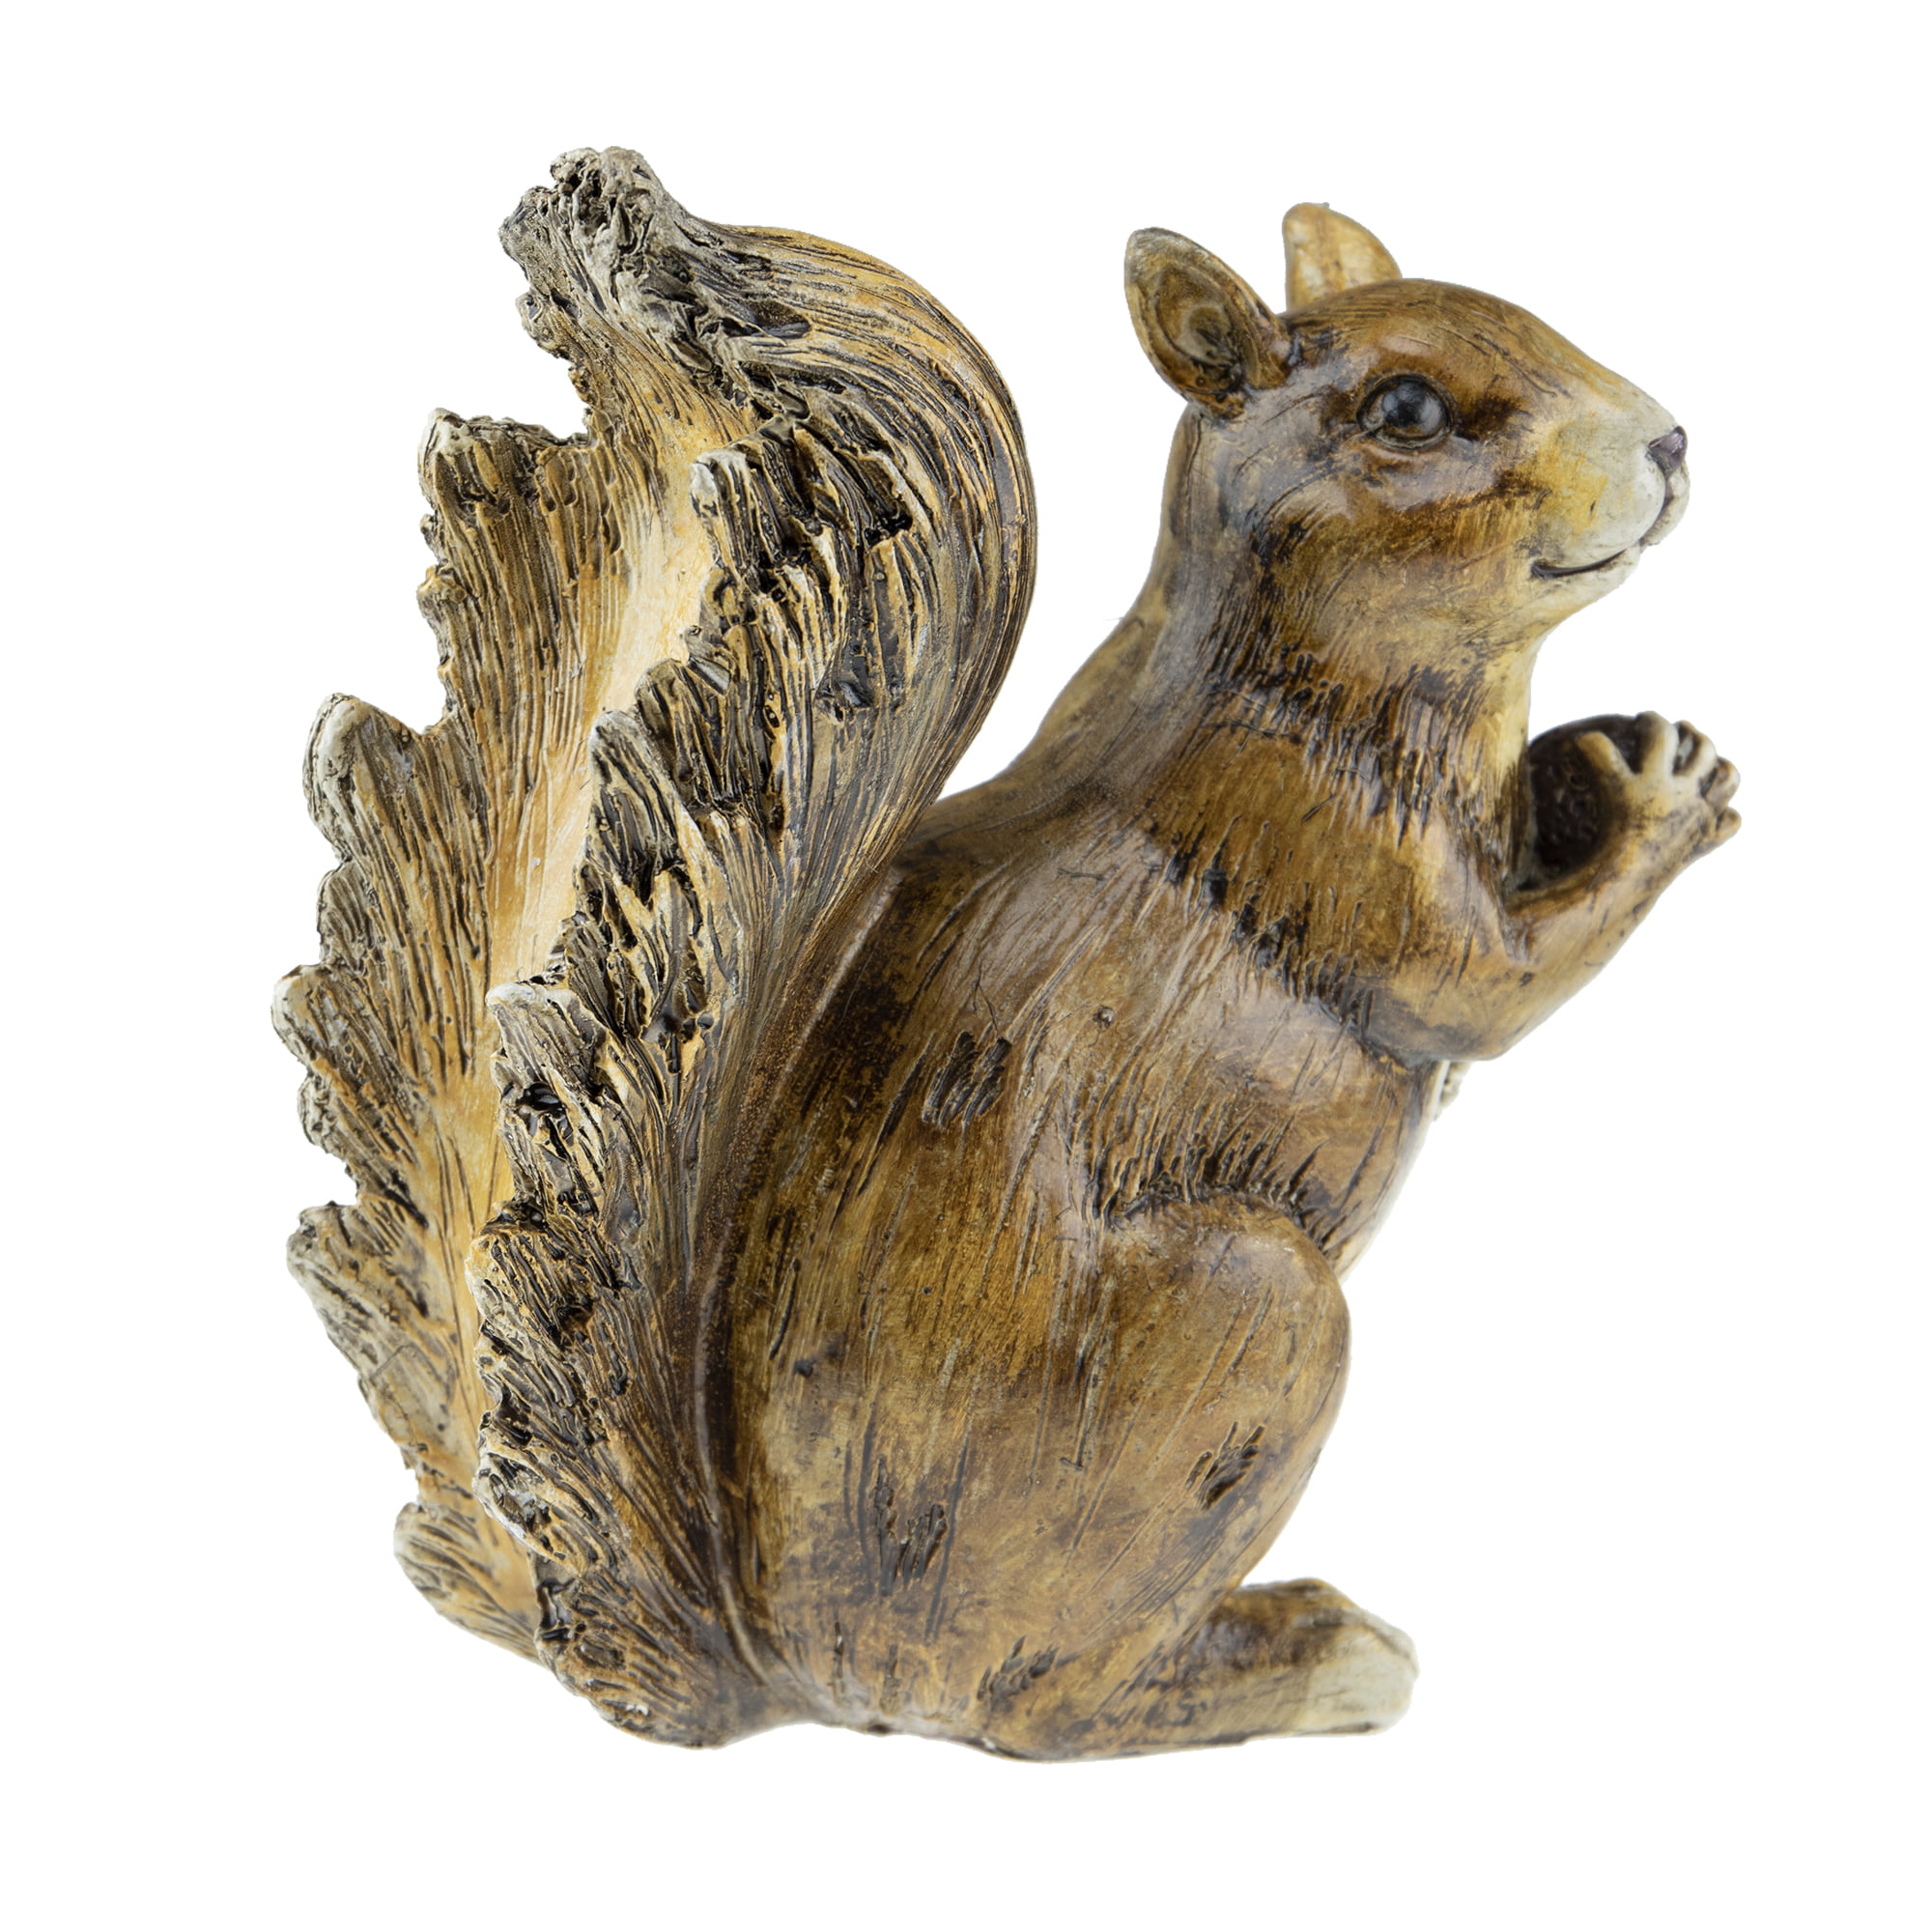 Squirrel Collectable Ornament Reflections Bronze Resin Sculpture Home Decor Gift 